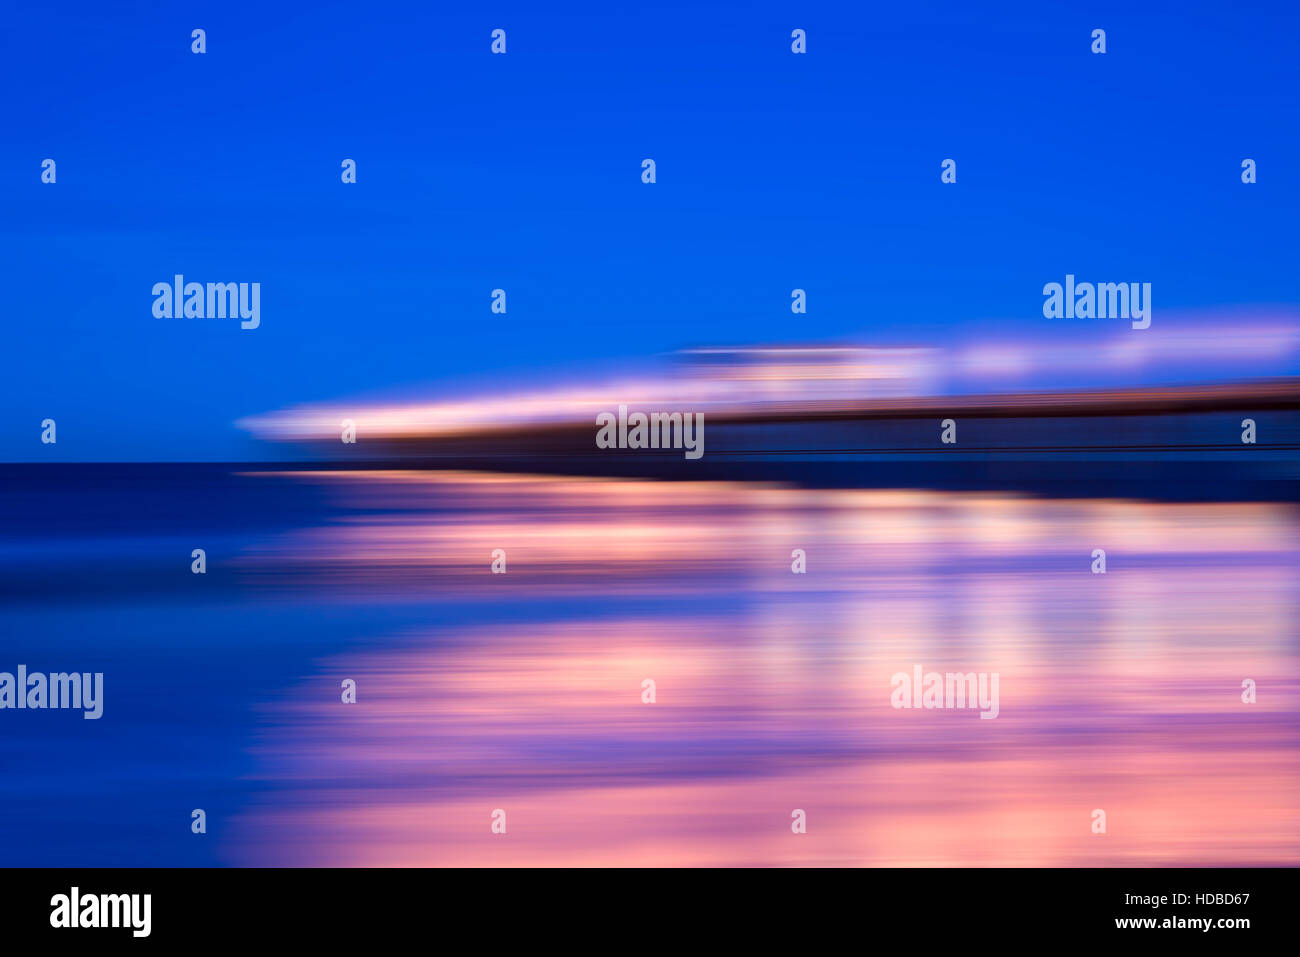 motion blur effect, pier with lamppost at night. Stock Photo